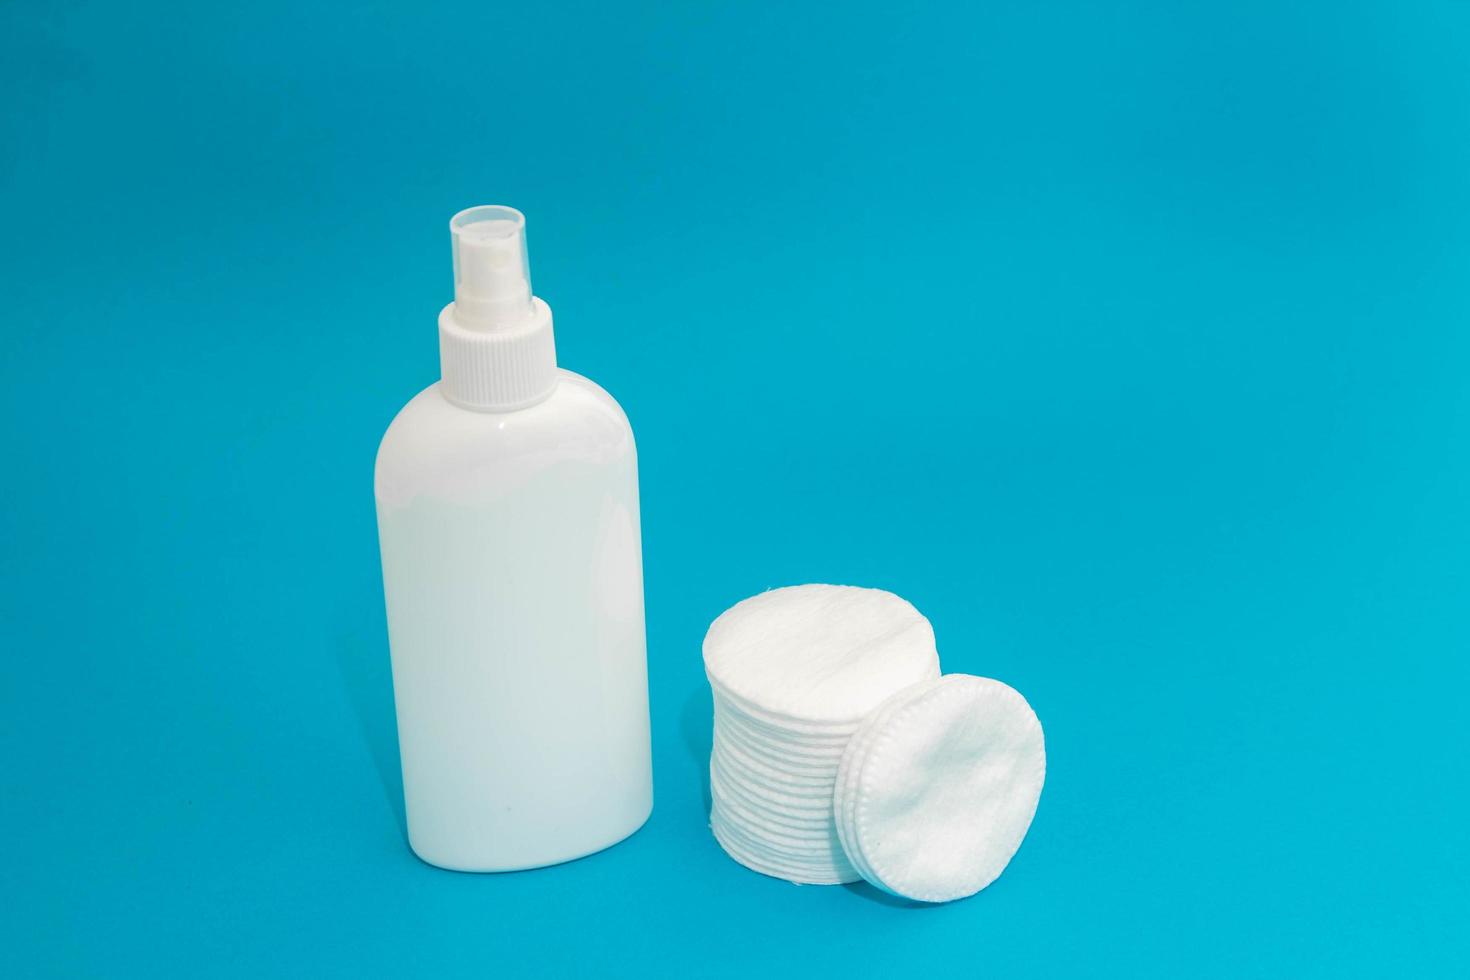 Cotton pads and plastic bottle on blue background photo